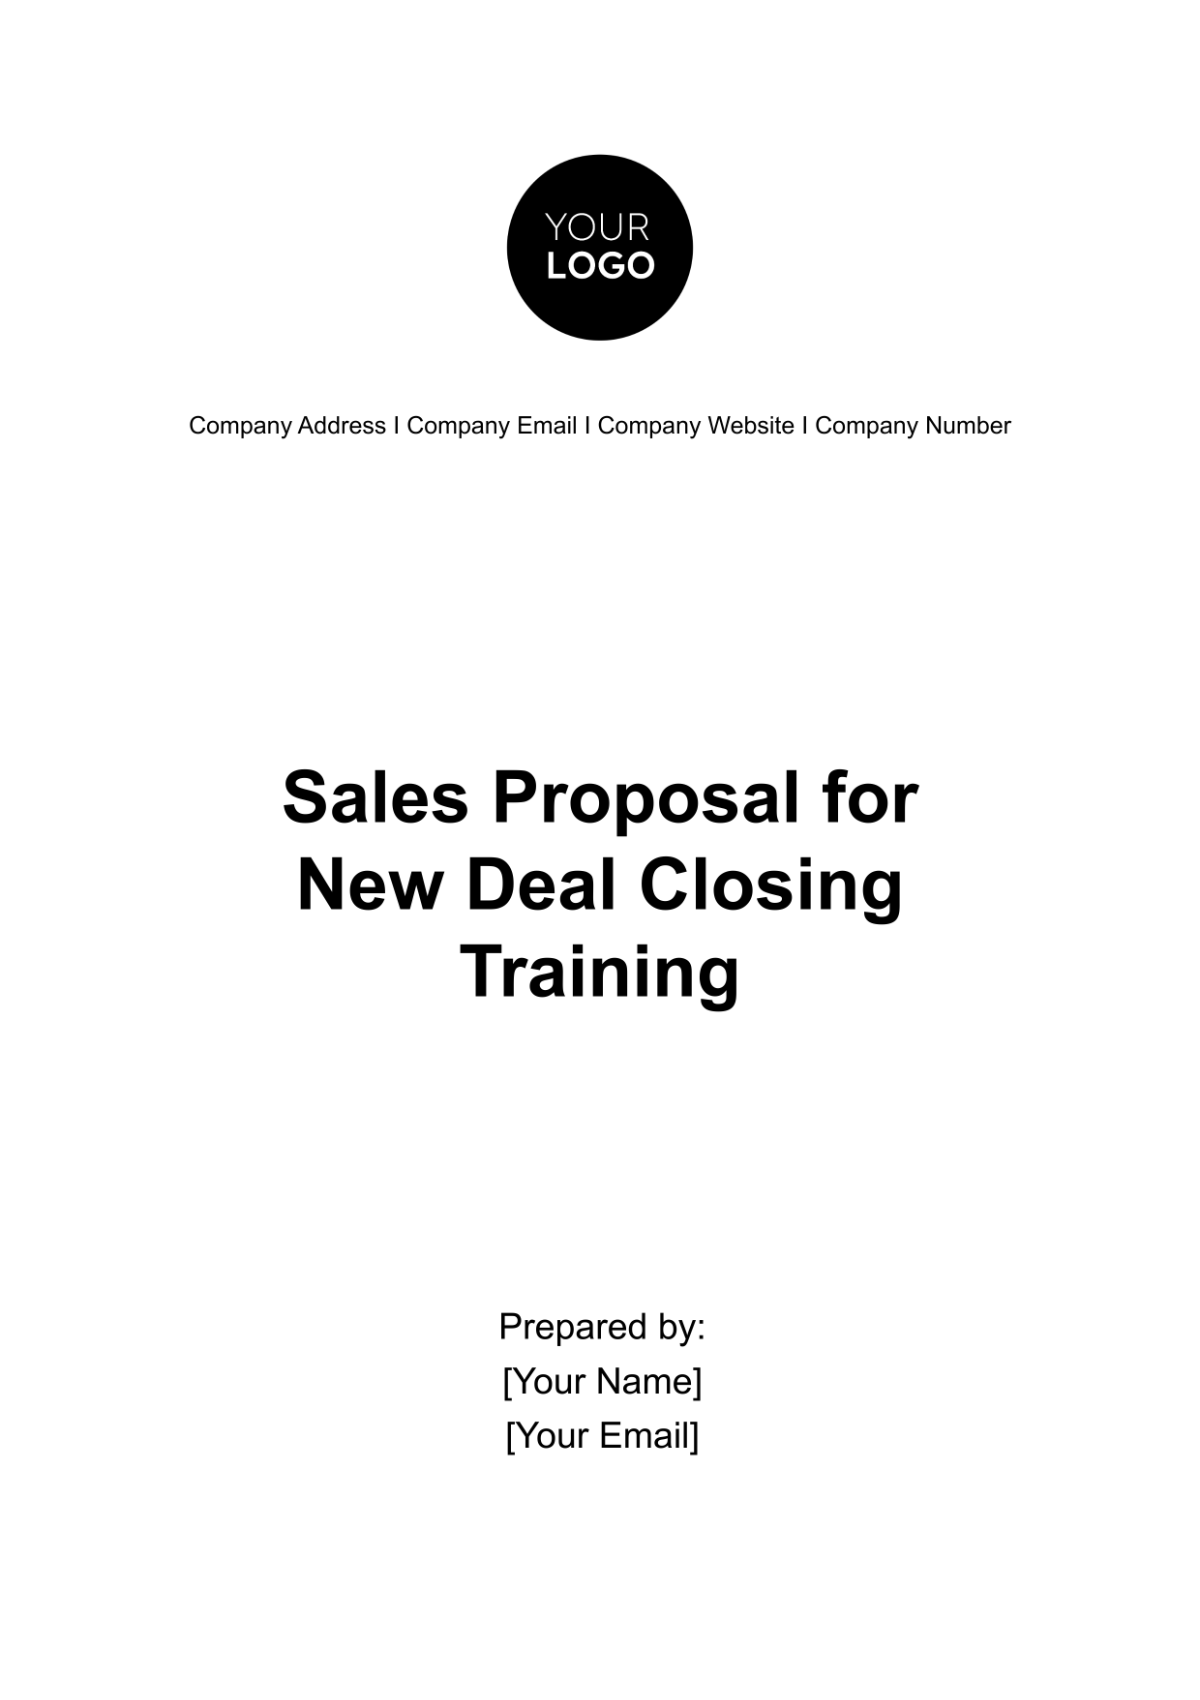 Sales Proposal for New Deal Closing Training Template